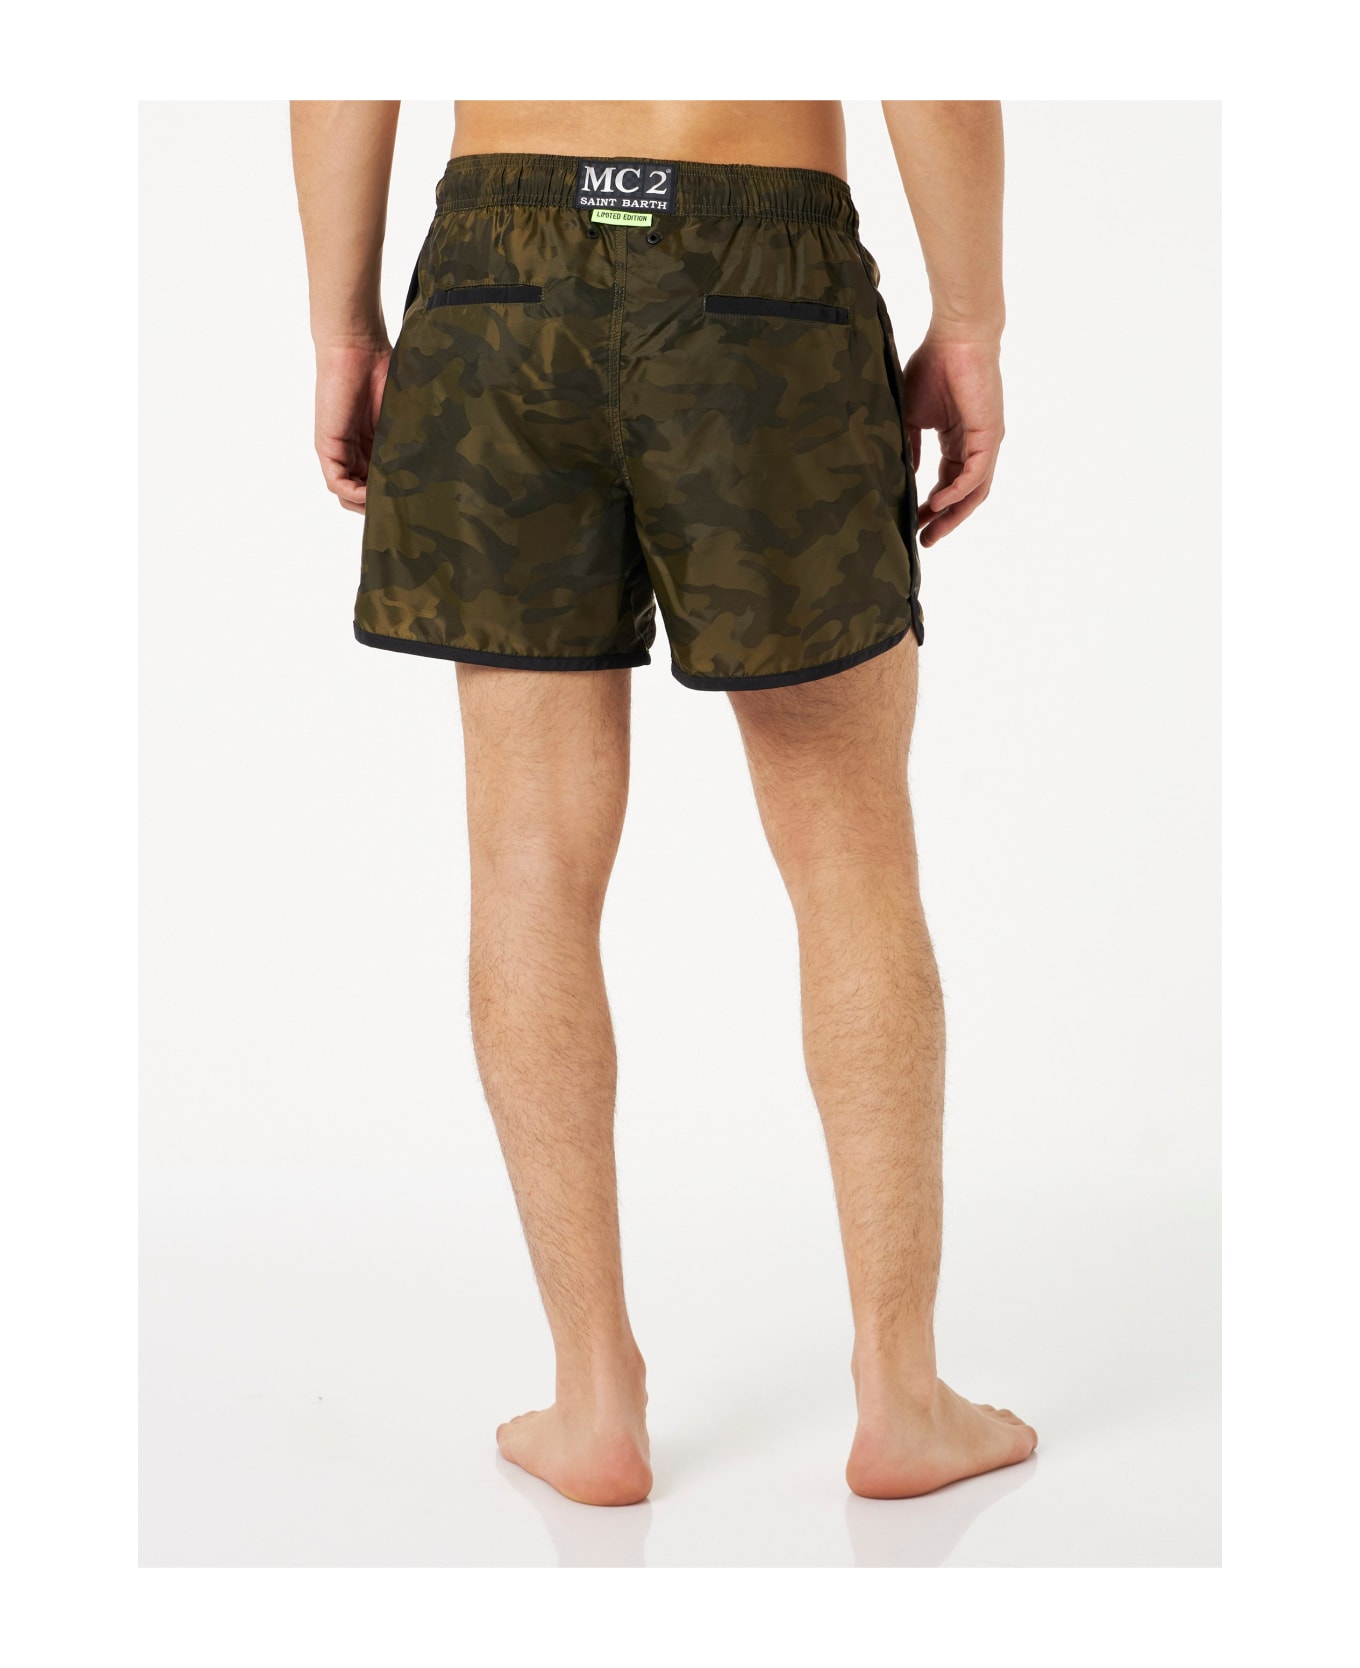 MC2 Saint Barth Man Swimshorts With Side Logo And Contrast - GREEN